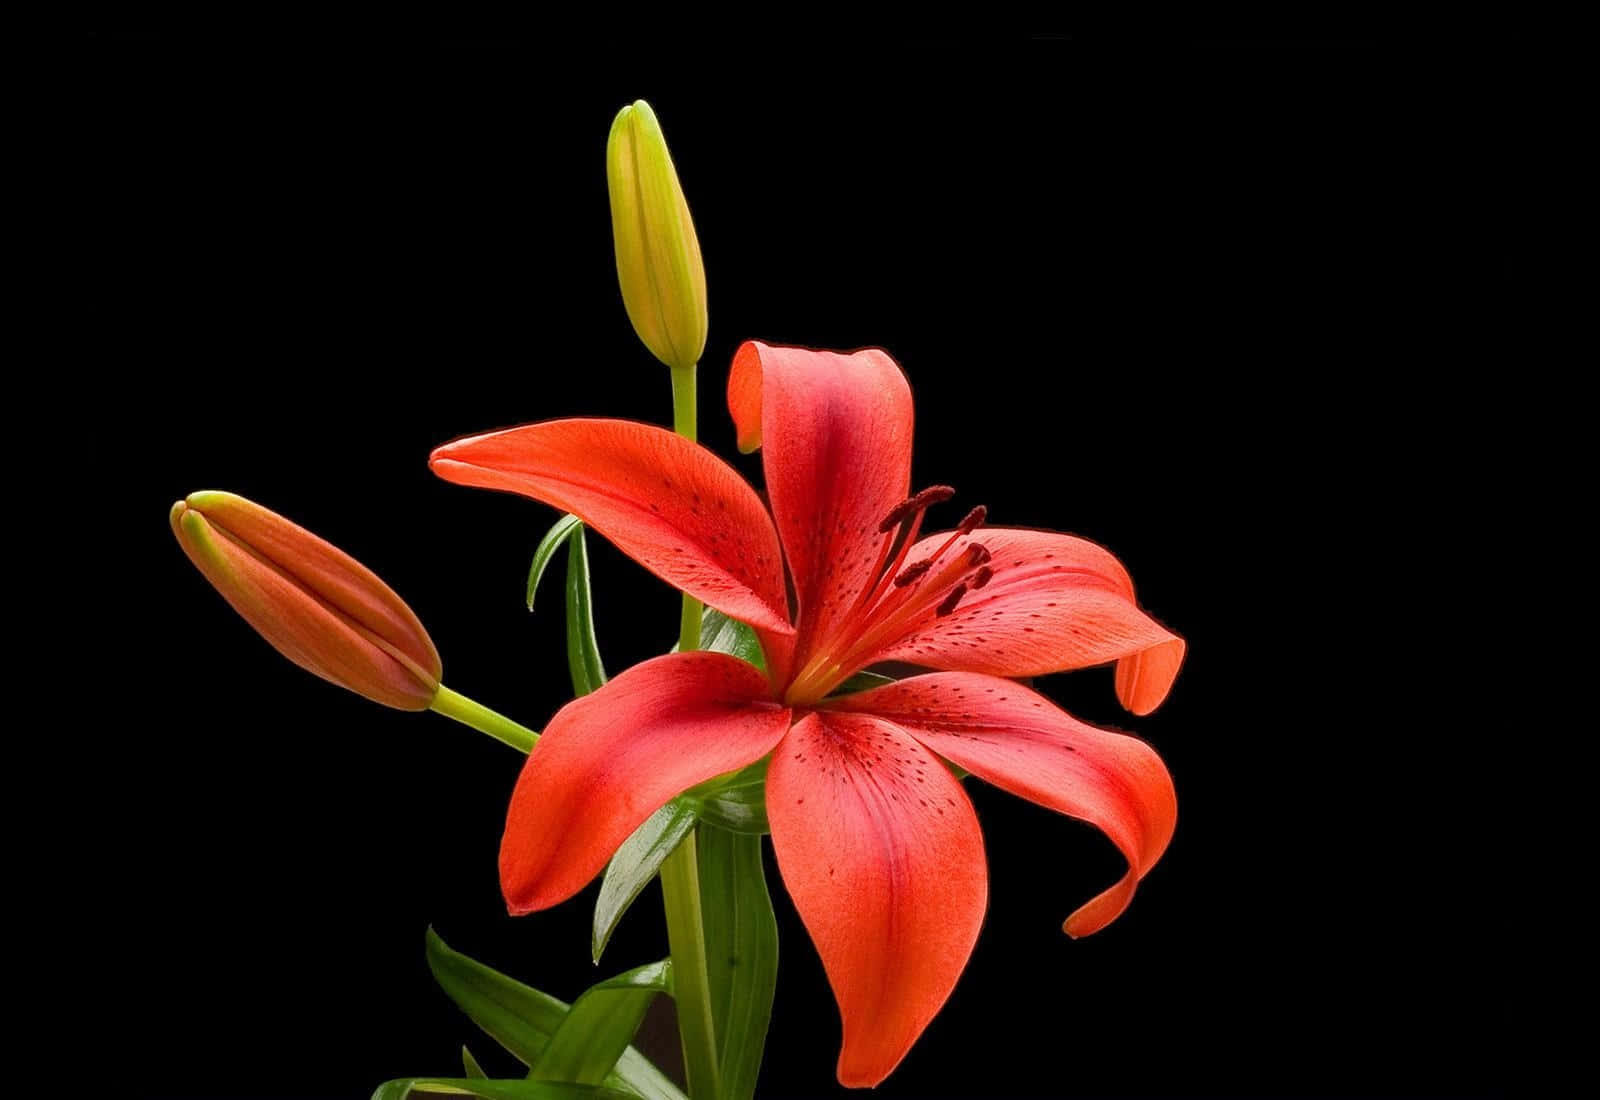 Download A Vibrant Lily in Bloom | Wallpapers.com